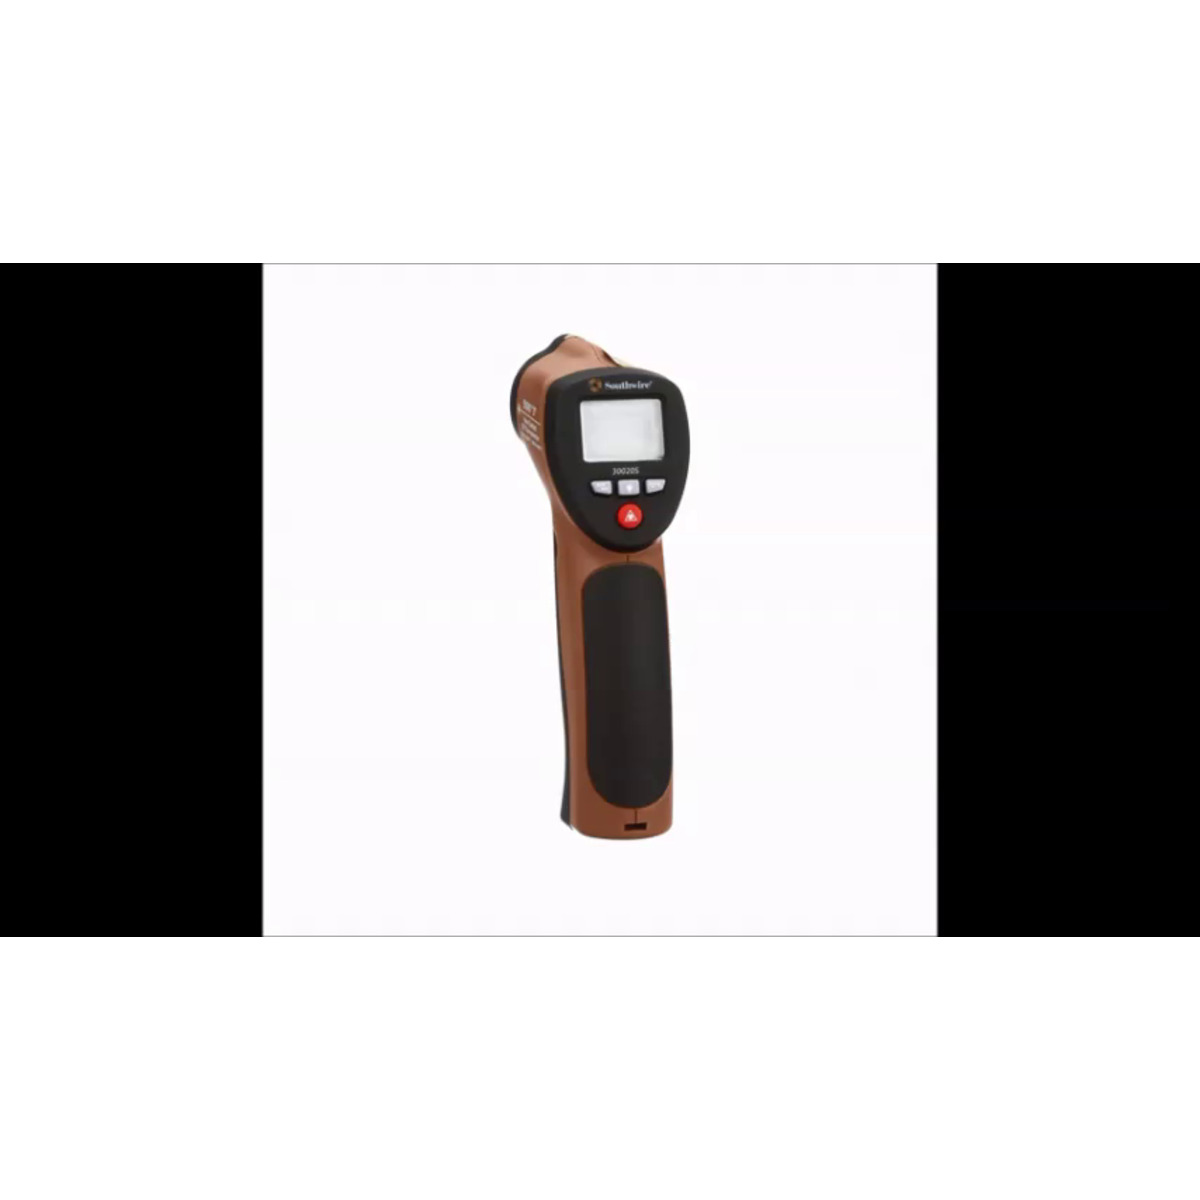 900°F Infrared Thermometer - Discontinued